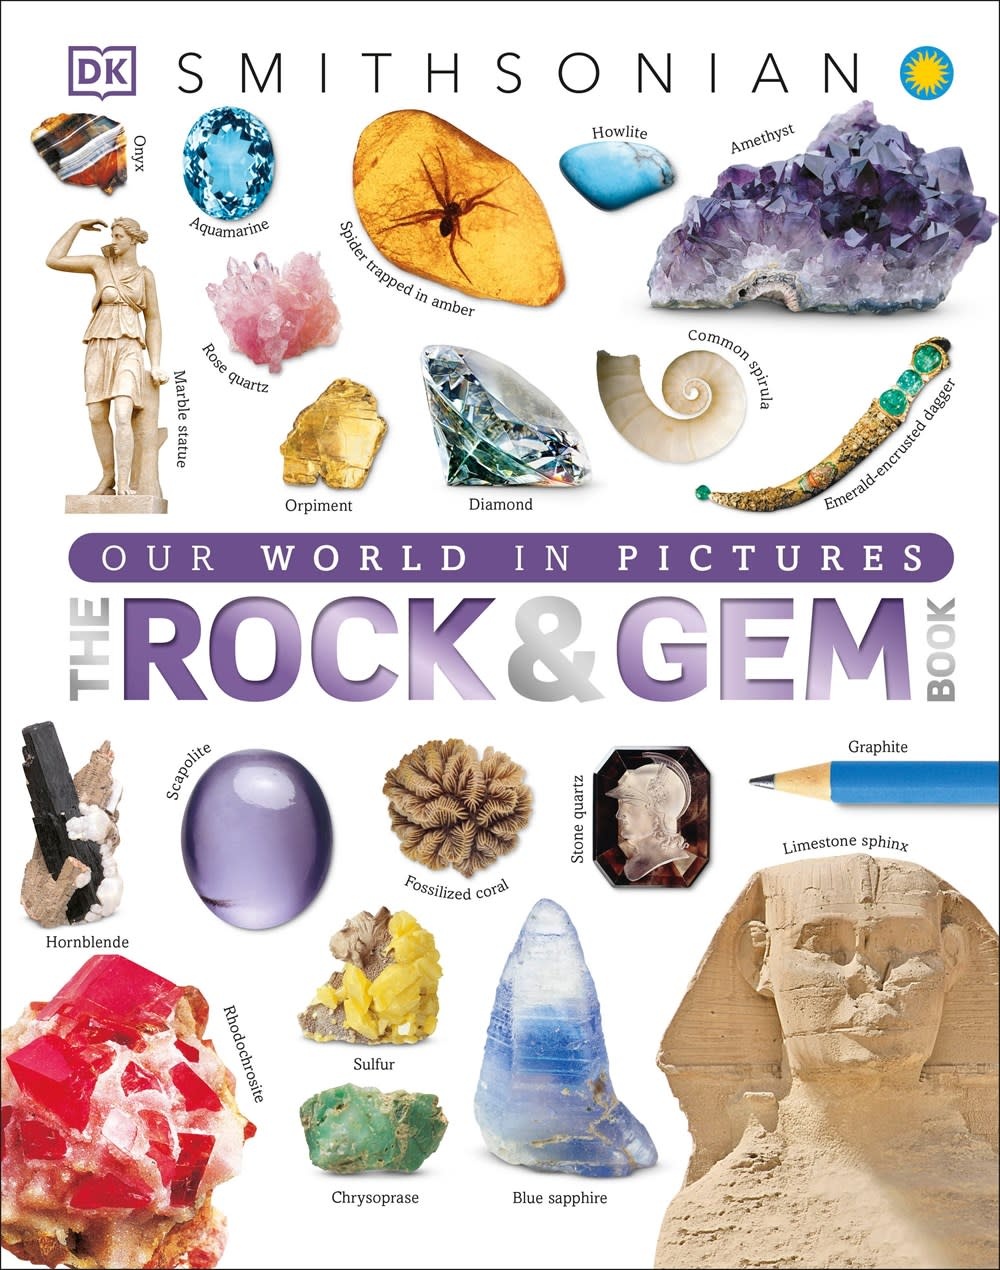 DK DK Smithsonian: The Rock & Gem Book (And Other Treasures of the Natural World)